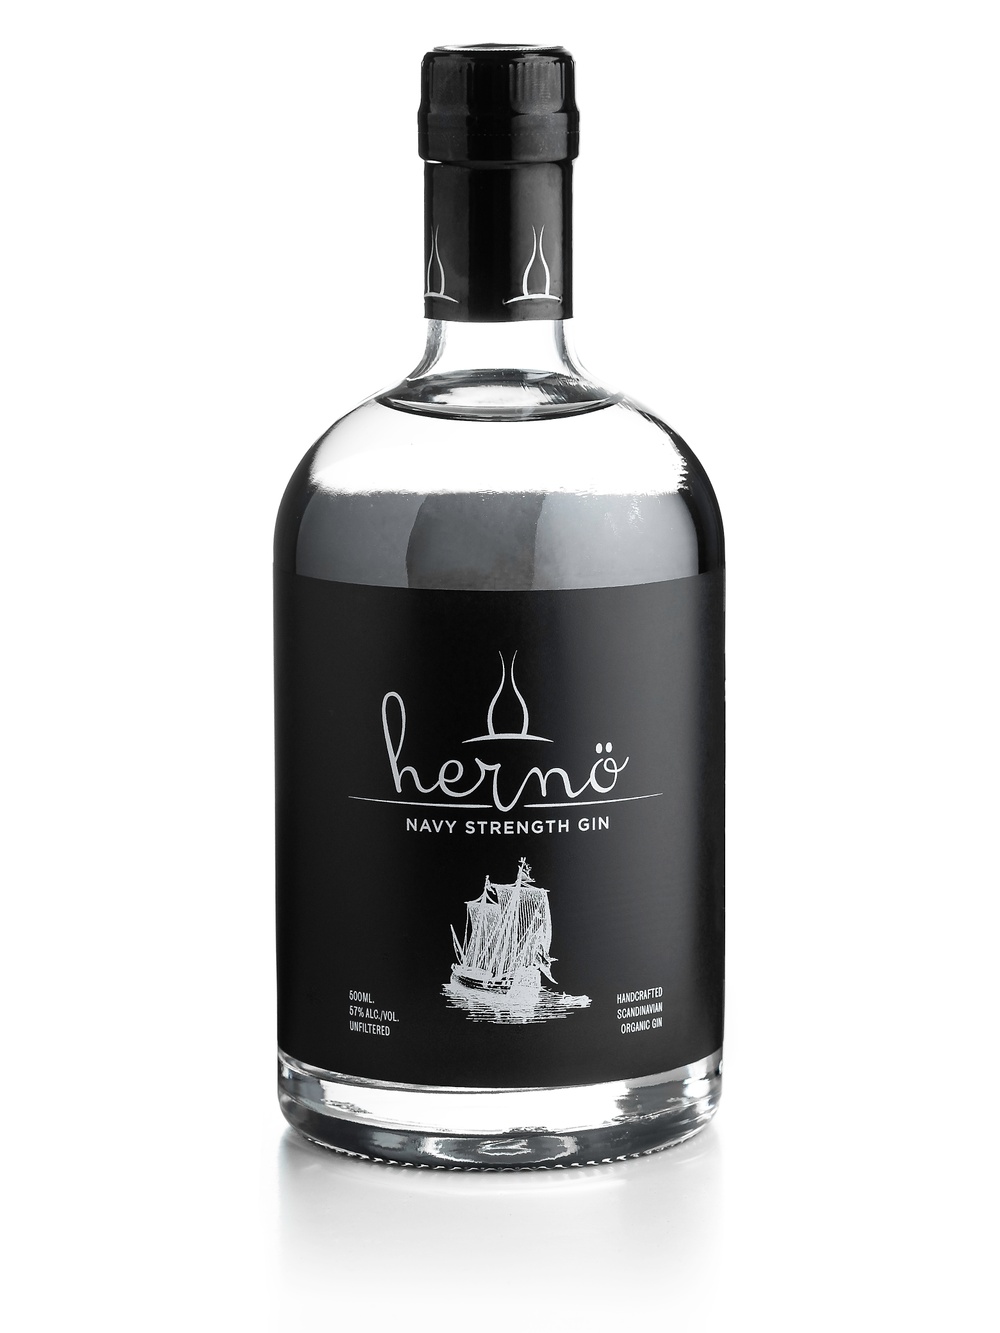 Hernö Navy Strength Gin, a bold flagship rich in flavour, is made from the same distilled gin as Hernö Gin, but diluted to 57% instead of 40,5%. The difference in aroma and taste is very clear and Hernö Navy Strength has an overall richer flavour with bolder juniper, coriander and citrus.